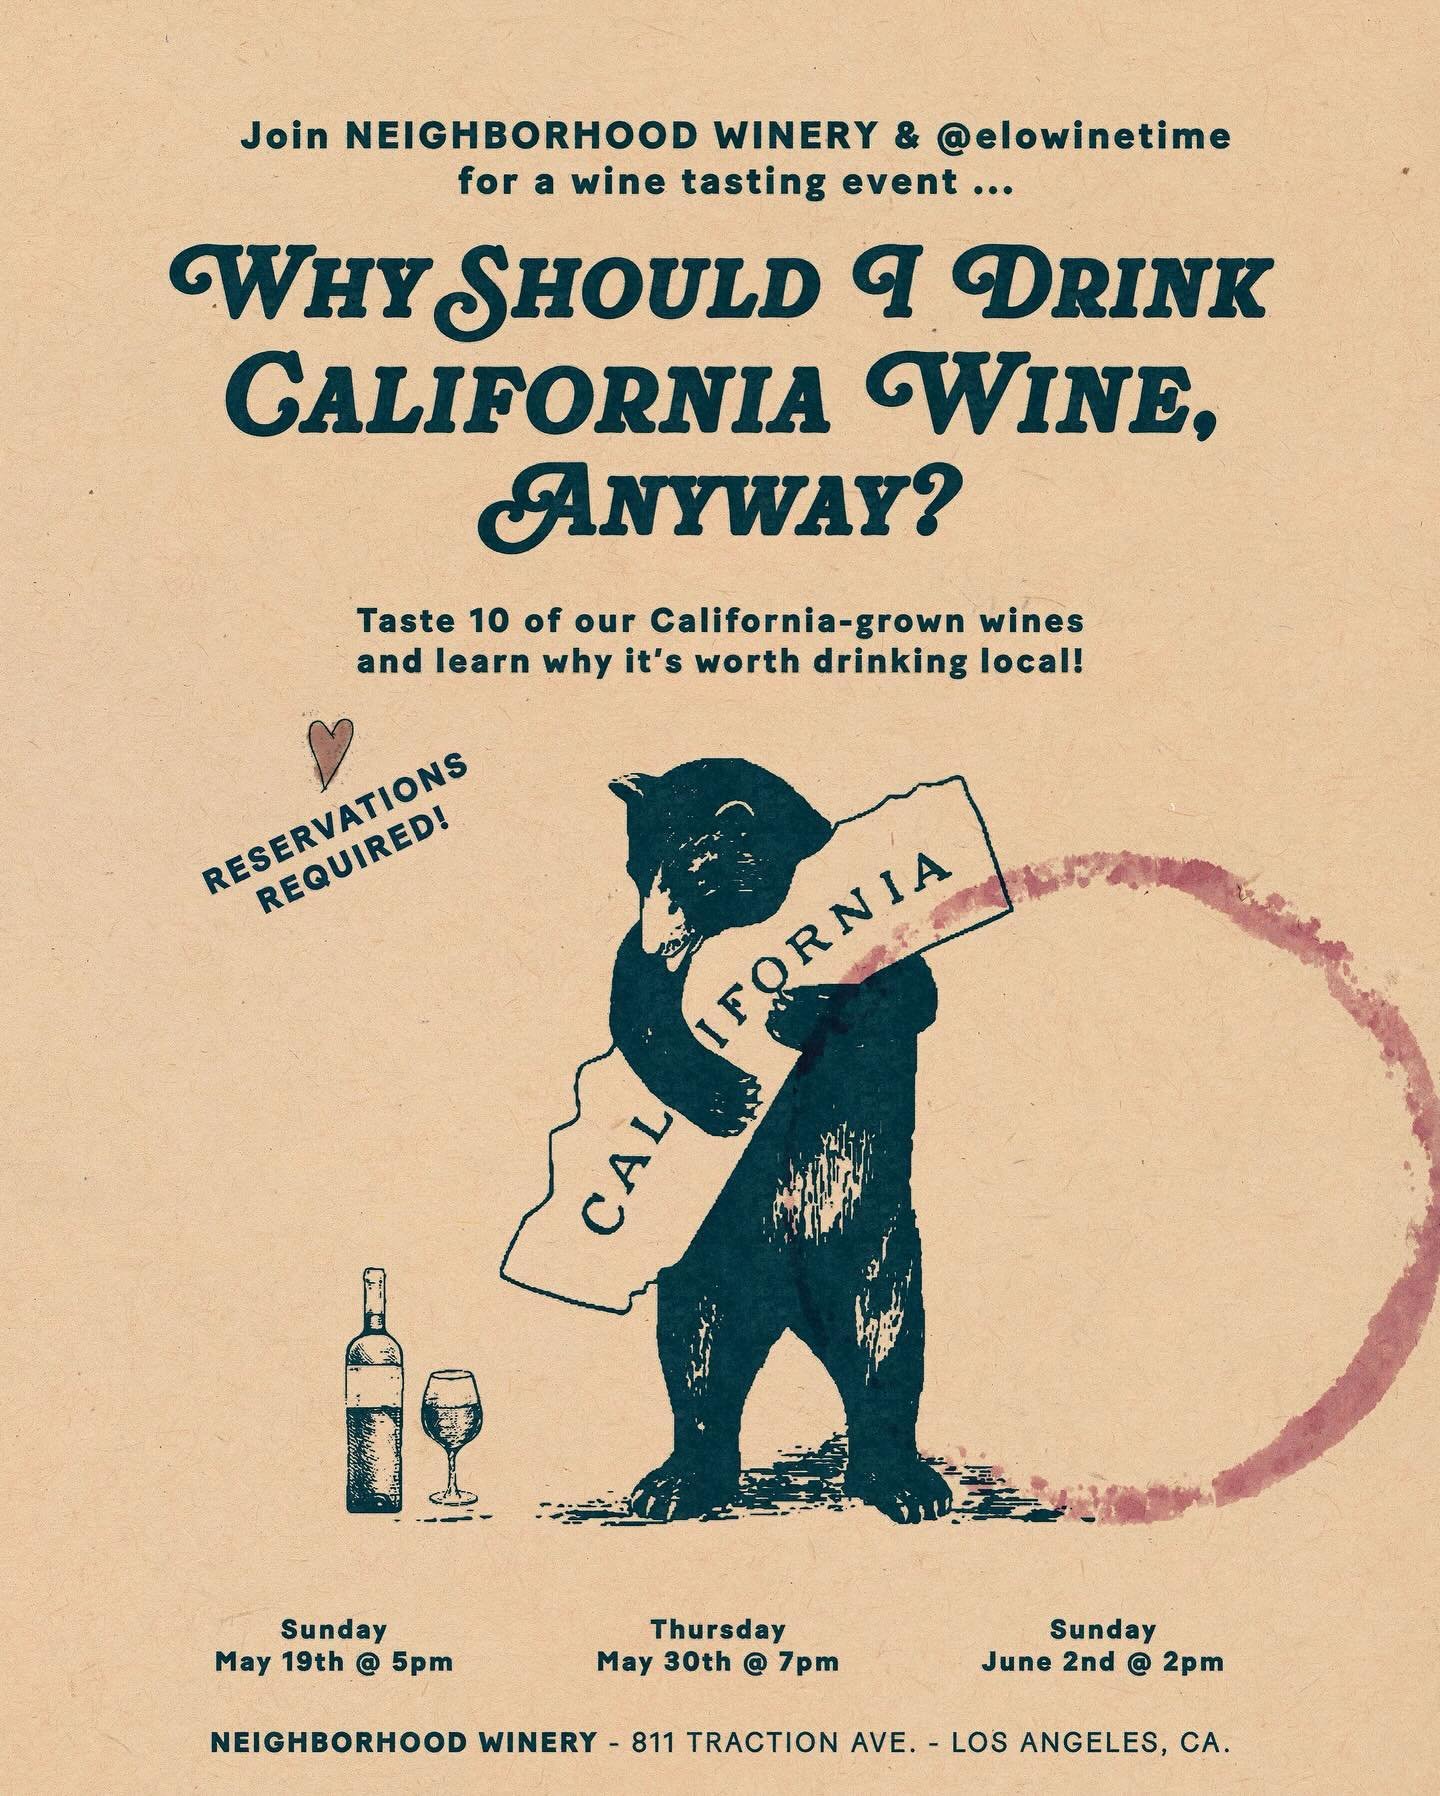 Why should you drink California wine? 🍷 Not only does it support our industry and care for our environment, but it&rsquo;s also outstandingly good! Join us and @elowinetime as we debunk myths and celebrate the diversity of California wines:

Dates:
